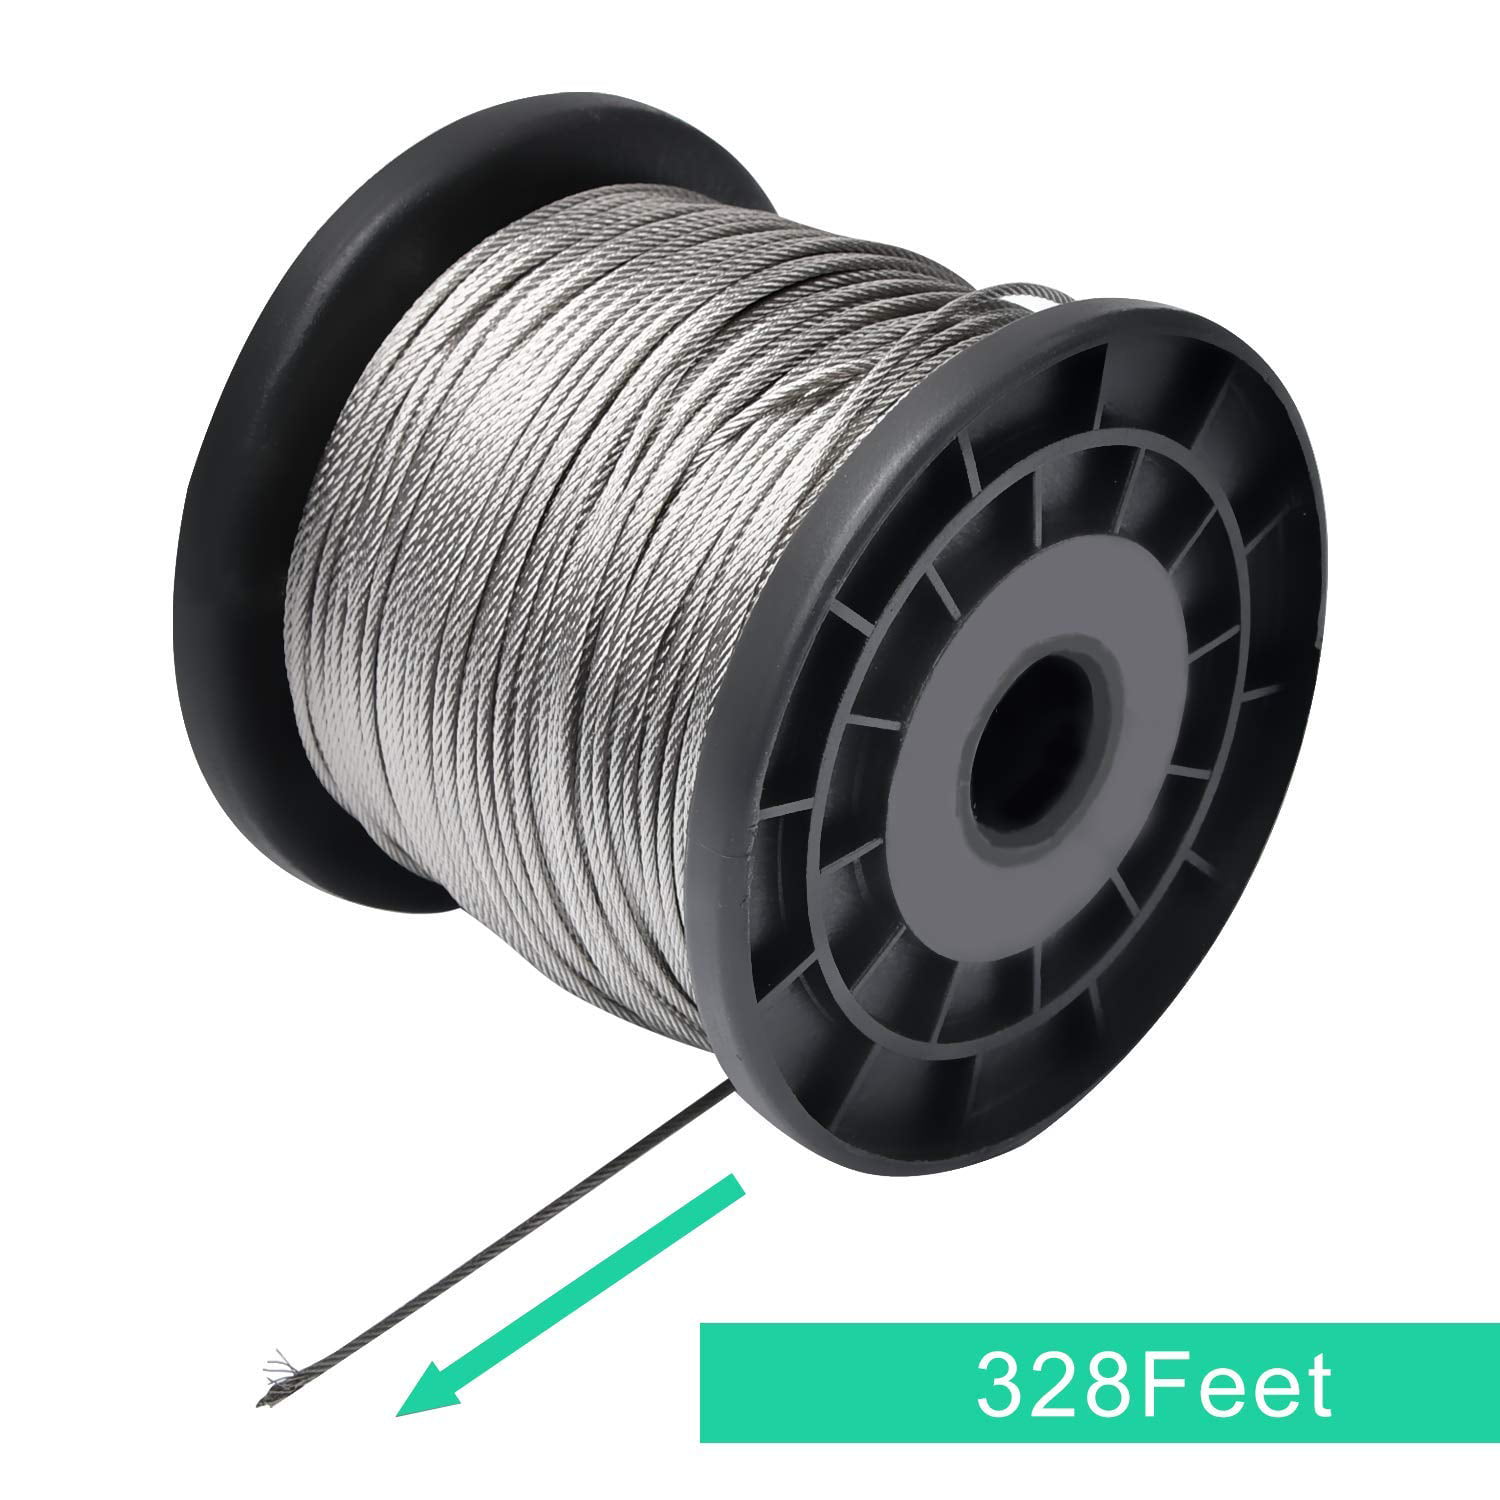 1/16 Wire Rope - 328ft 304 Stainless Steel Cable, 7x7, 368lbs Breaking Strength-with 150 Crimping Sleeves for Various Applications